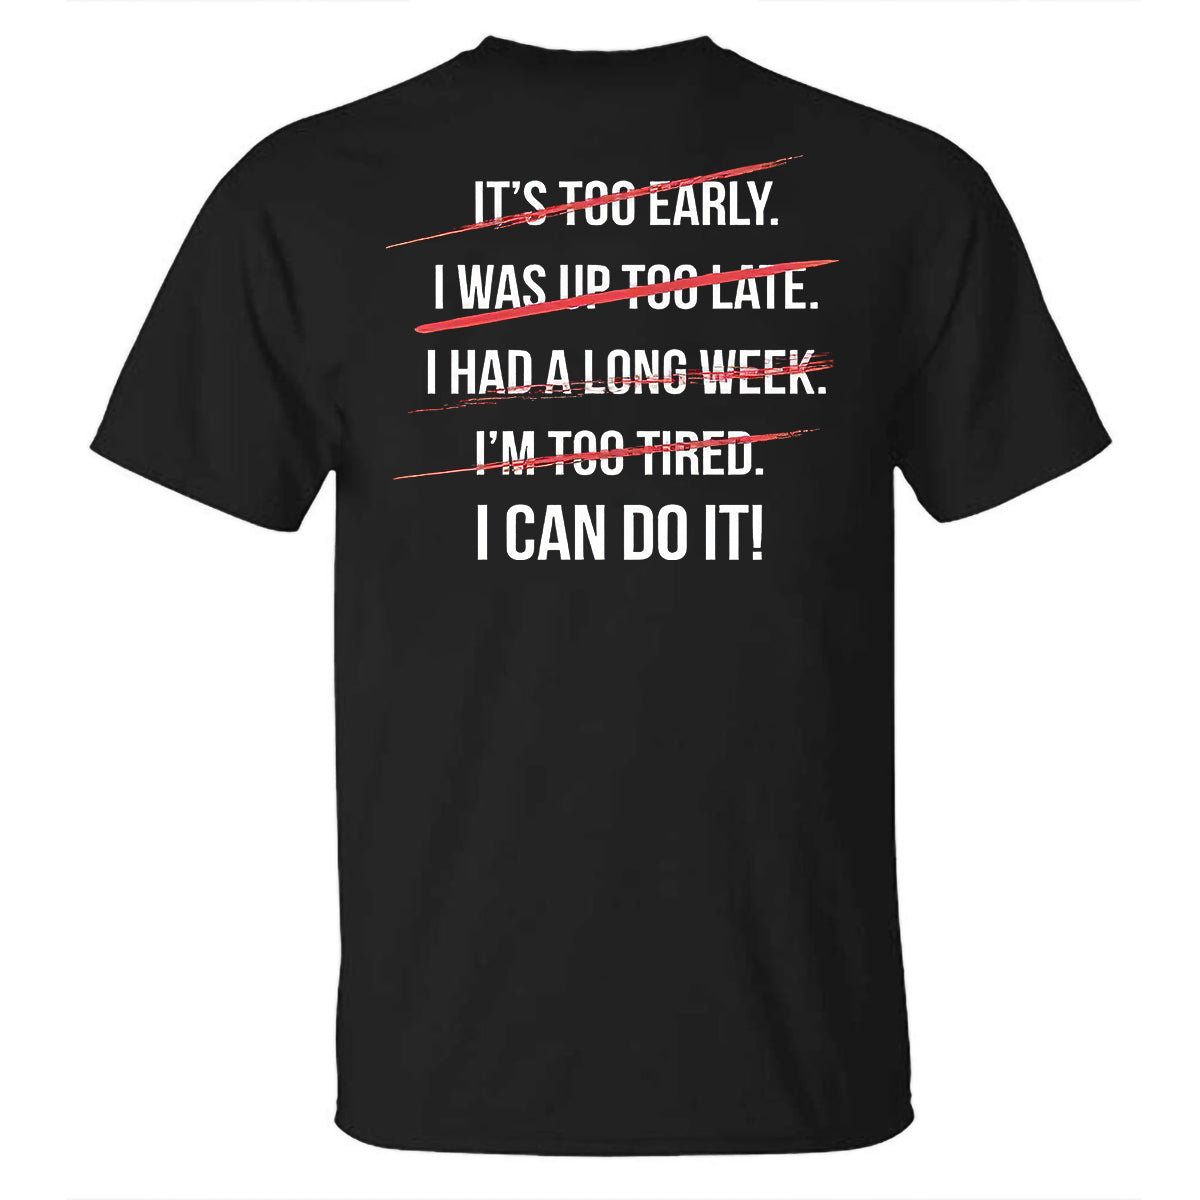 I Can Do It Printed T-shirt